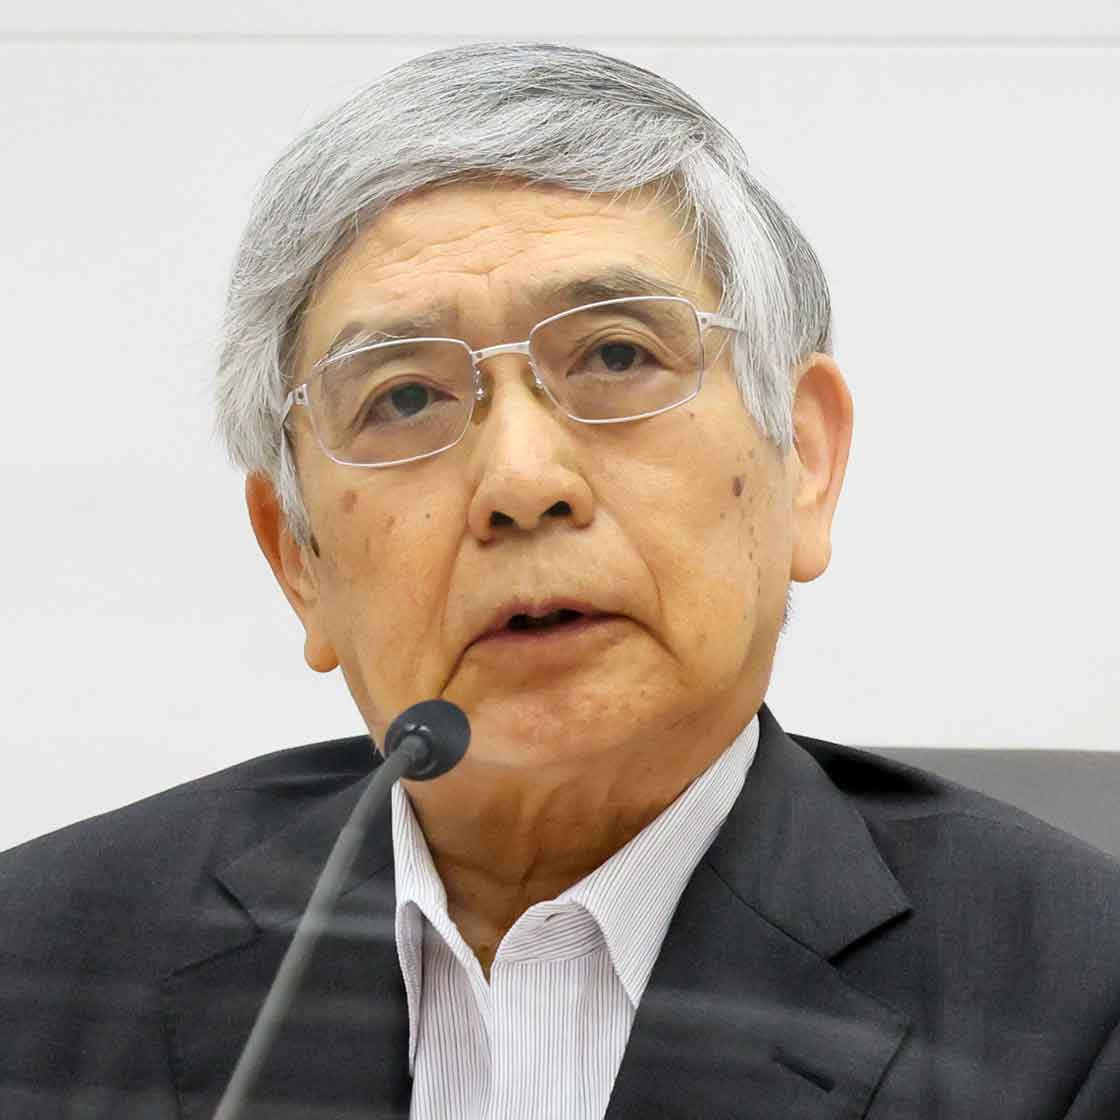 BOJ’s Longest-serving Governor: The impact of ‘different dimension’ monetary policy